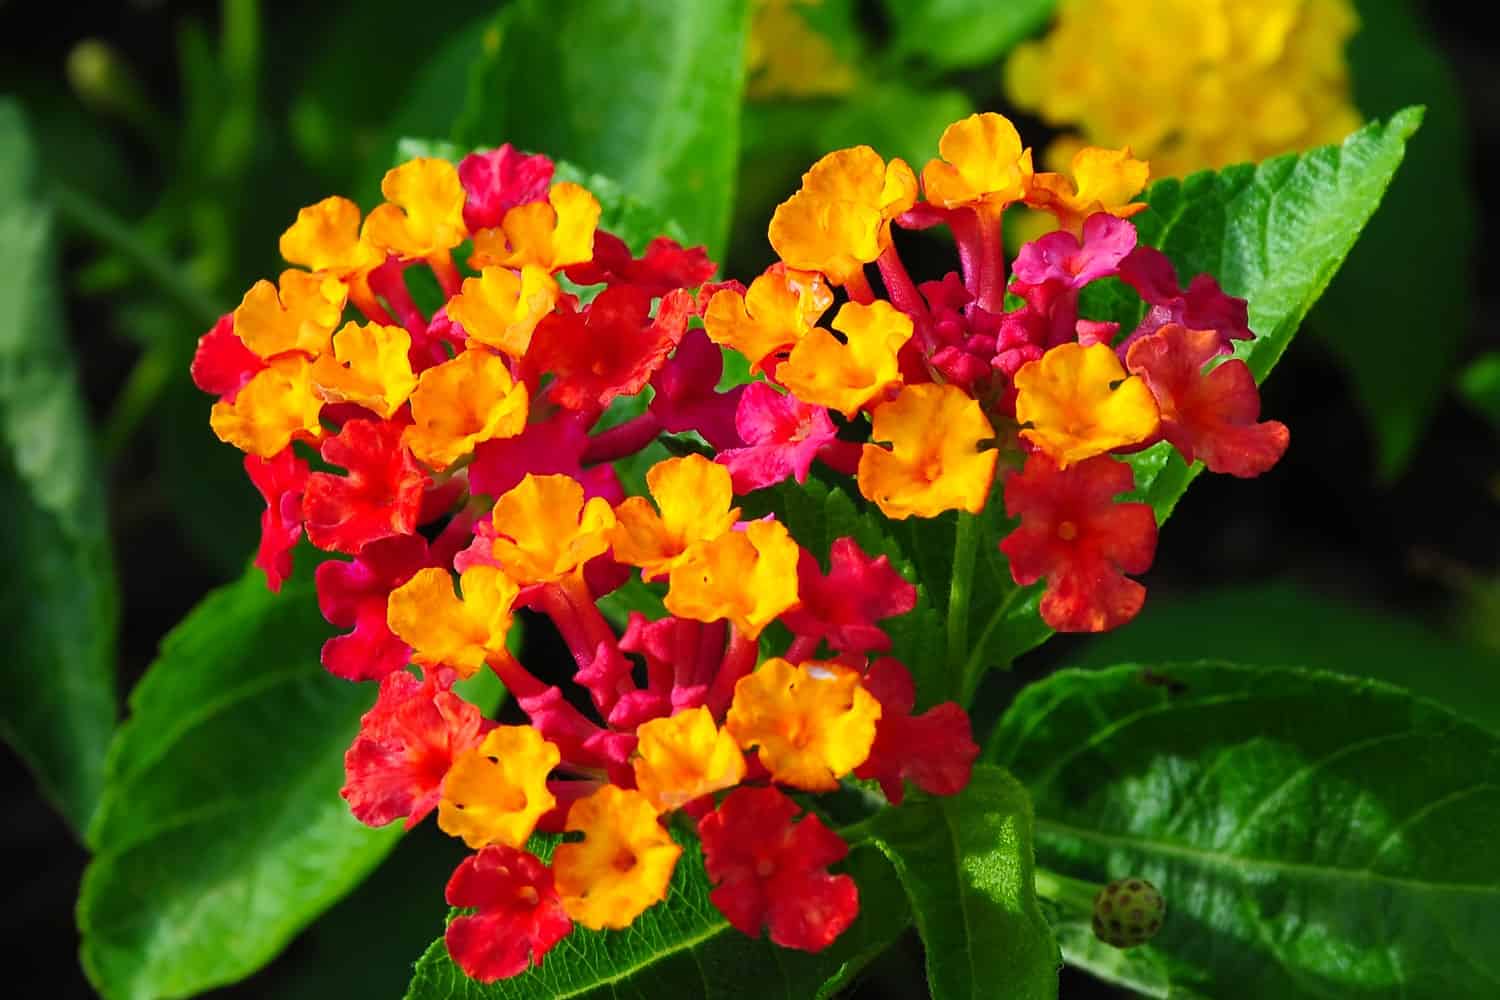 Stunning bright yellow and red petals of a Lantana flower